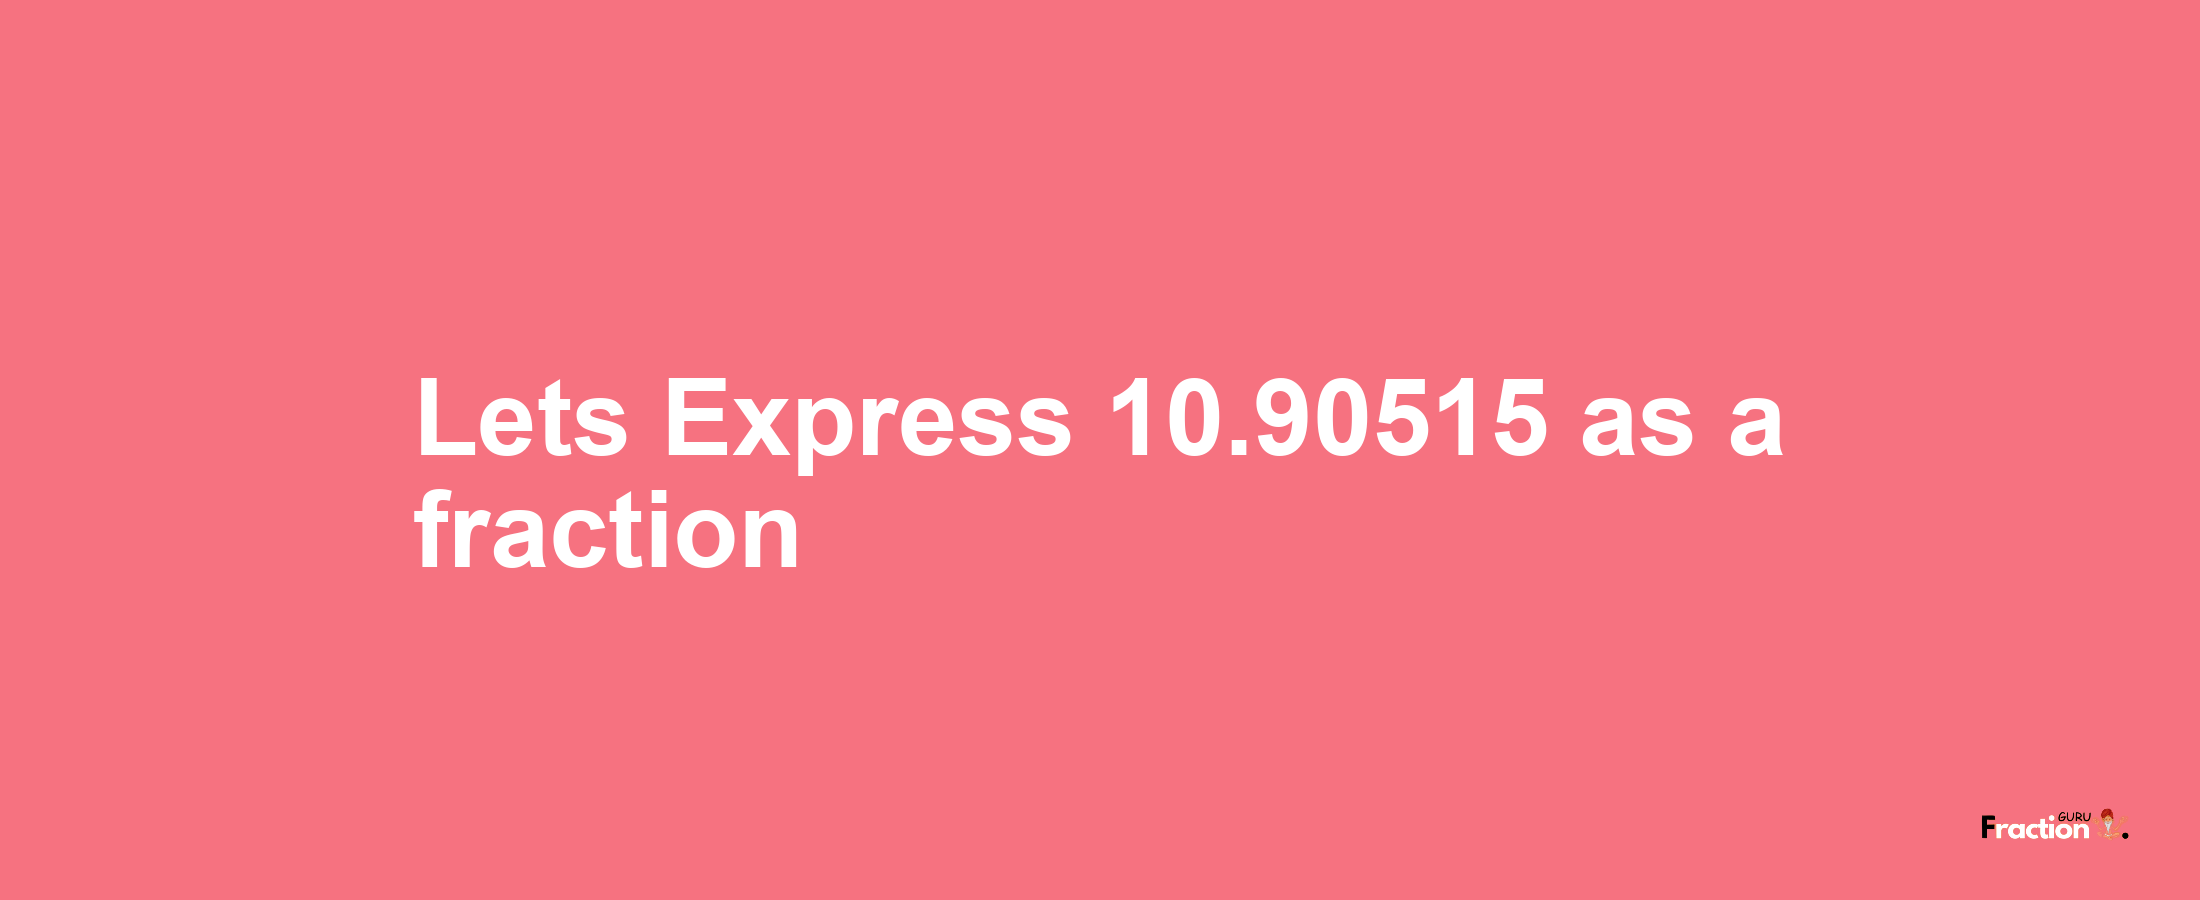 Lets Express 10.90515 as afraction